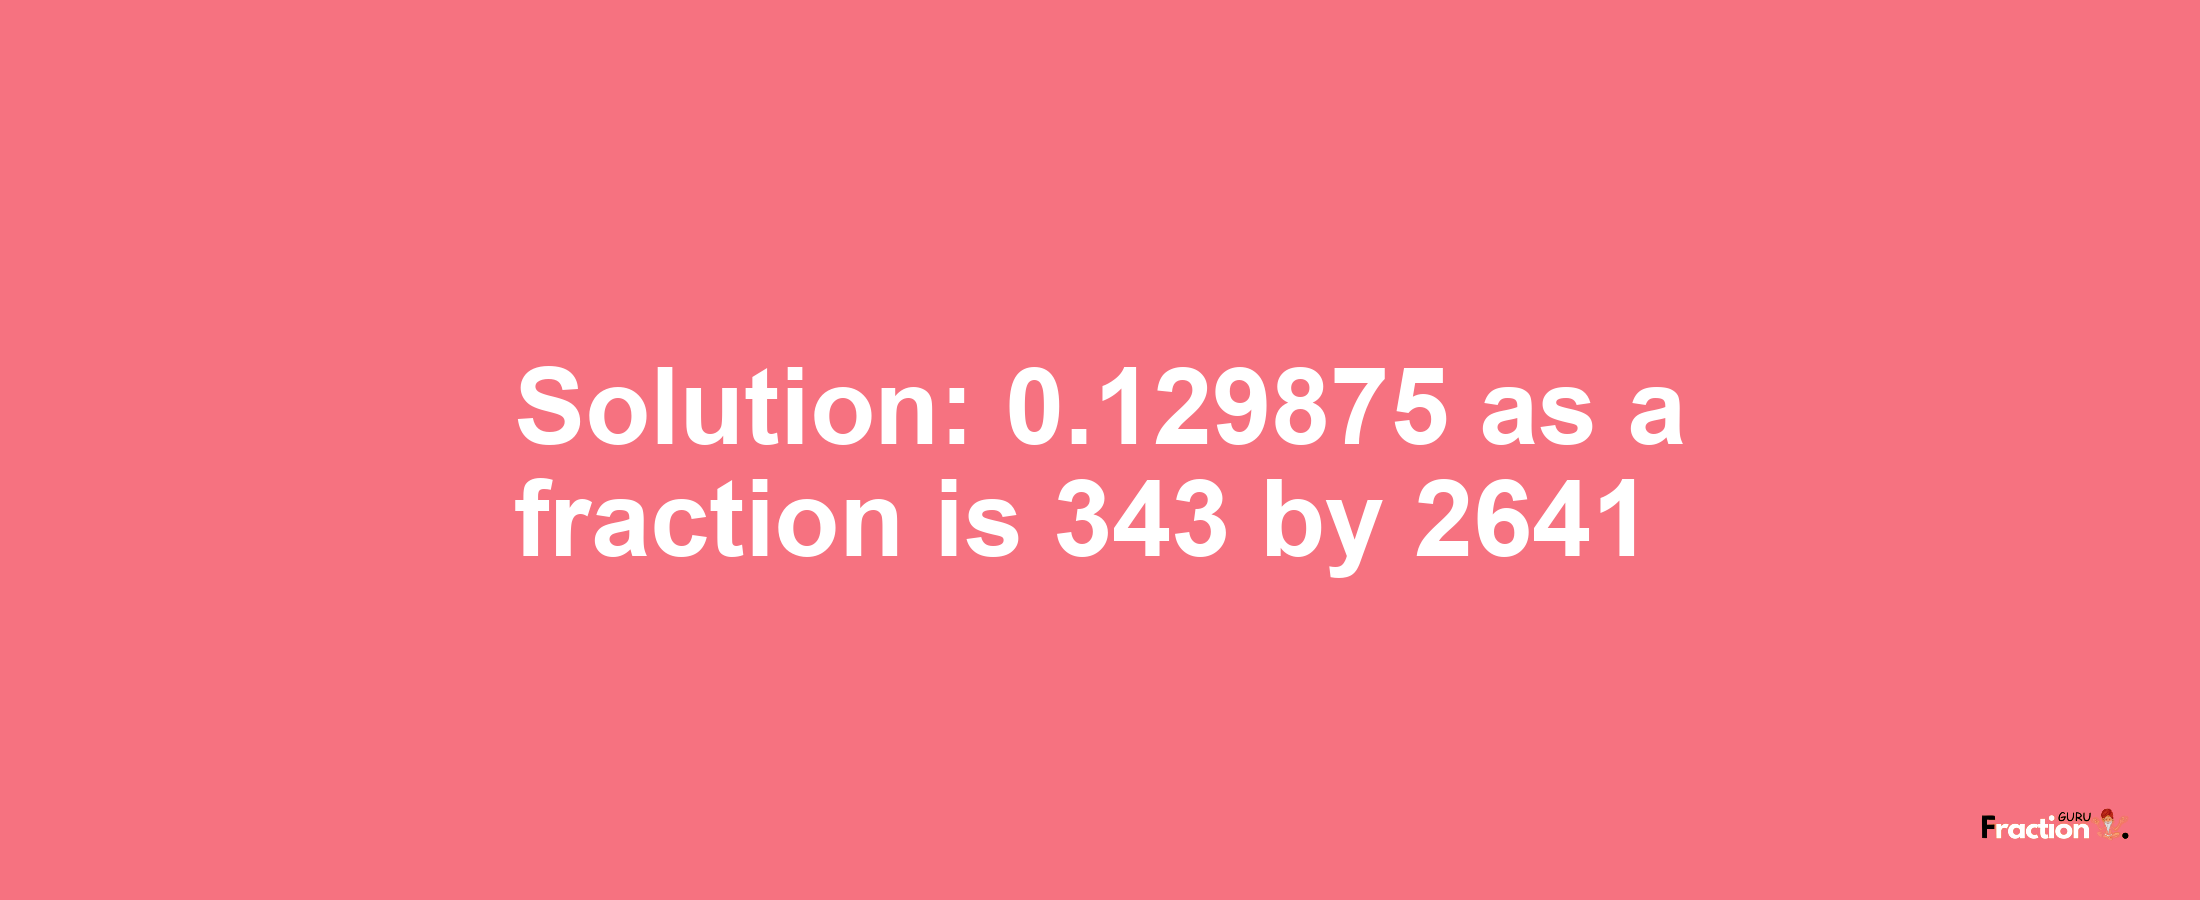 Solution:0.129875 as a fraction is 343/2641